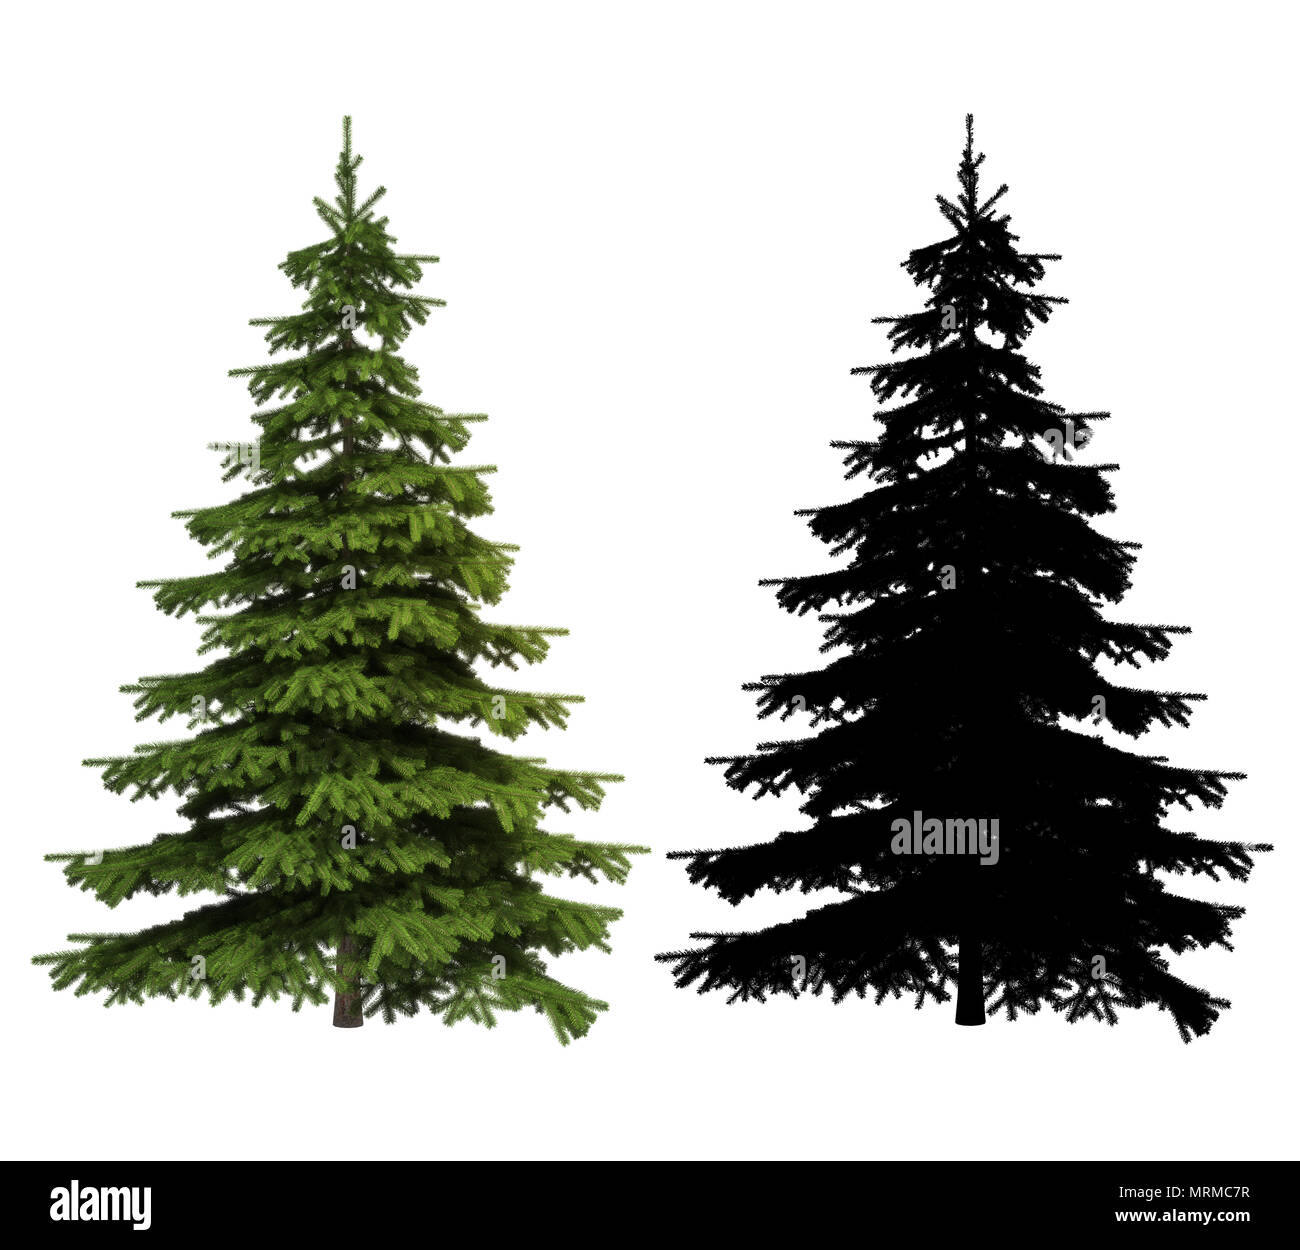 Ultra detailed Picea spruce tree with silhouette included, isolated on a white background Stock Photo